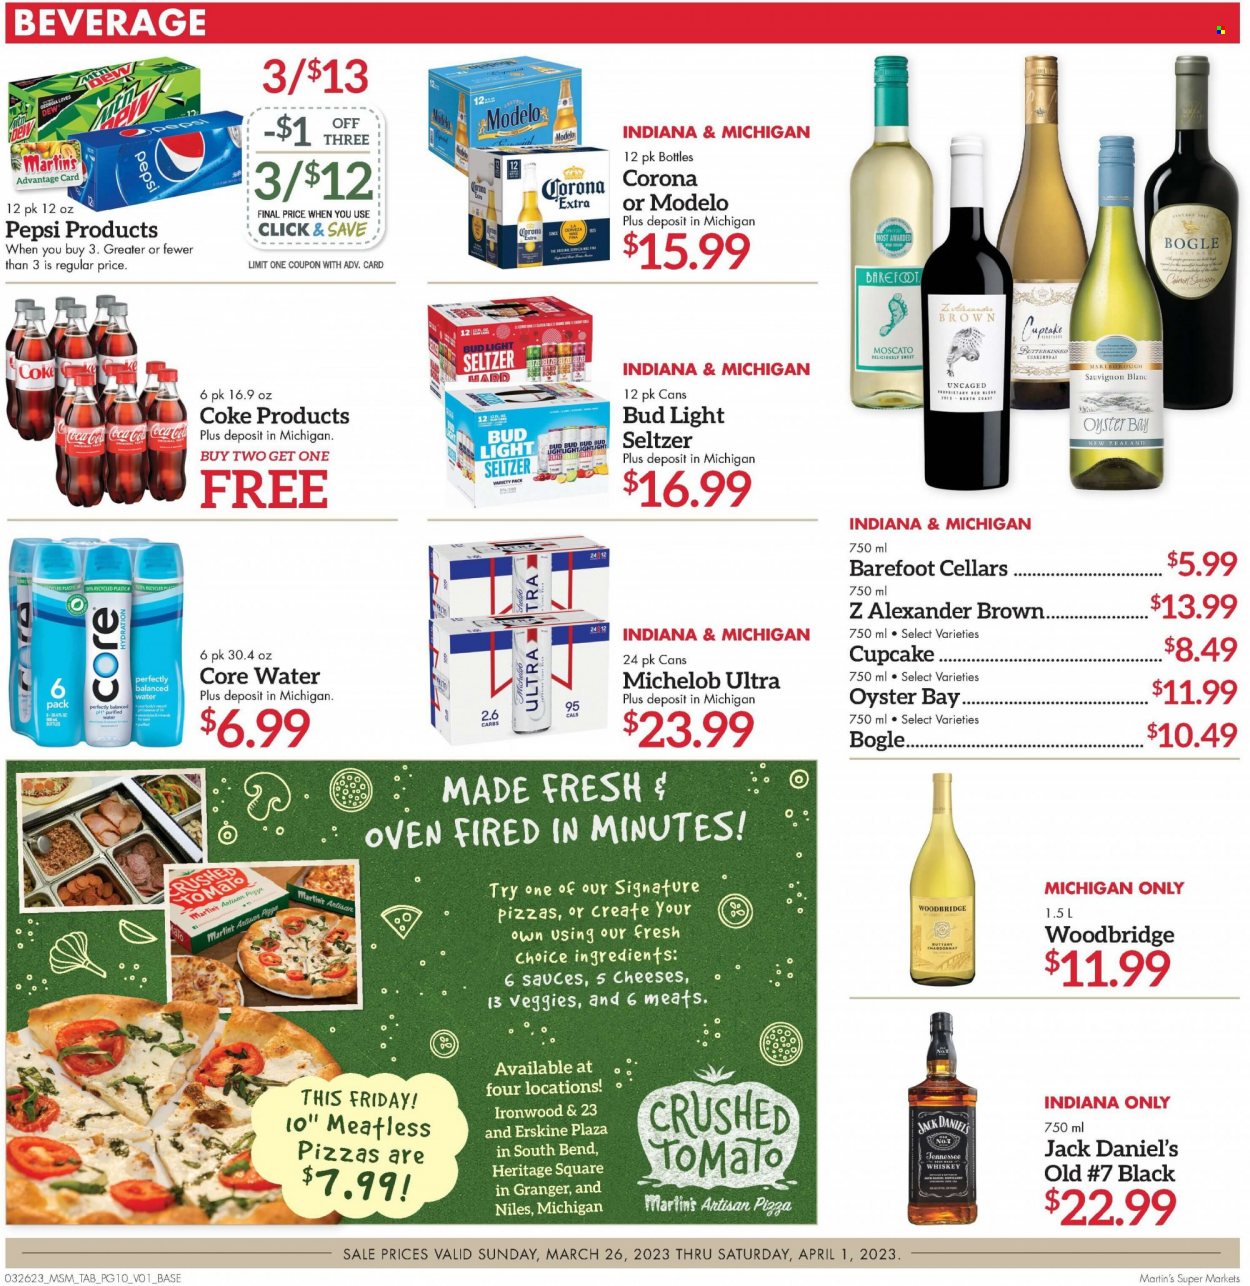 thumbnail - Martin’s Flyer - 03/26/2023 - 04/01/2023 - Sales products - oysters, Jack Daniel's, pizza, cheese, Coca-Cola, Pepsi, Coke, water, Cabernet Sauvignon, Chardonnay, wine, Moscato, Sauvignon Blanc, Woodbridge, Cupcake Vineyards, Tennessee Whiskey, whiskey, Hard Seltzer, whisky, beer, Bud Light, Corona Extra, Modelo, Michelob. Page 10.